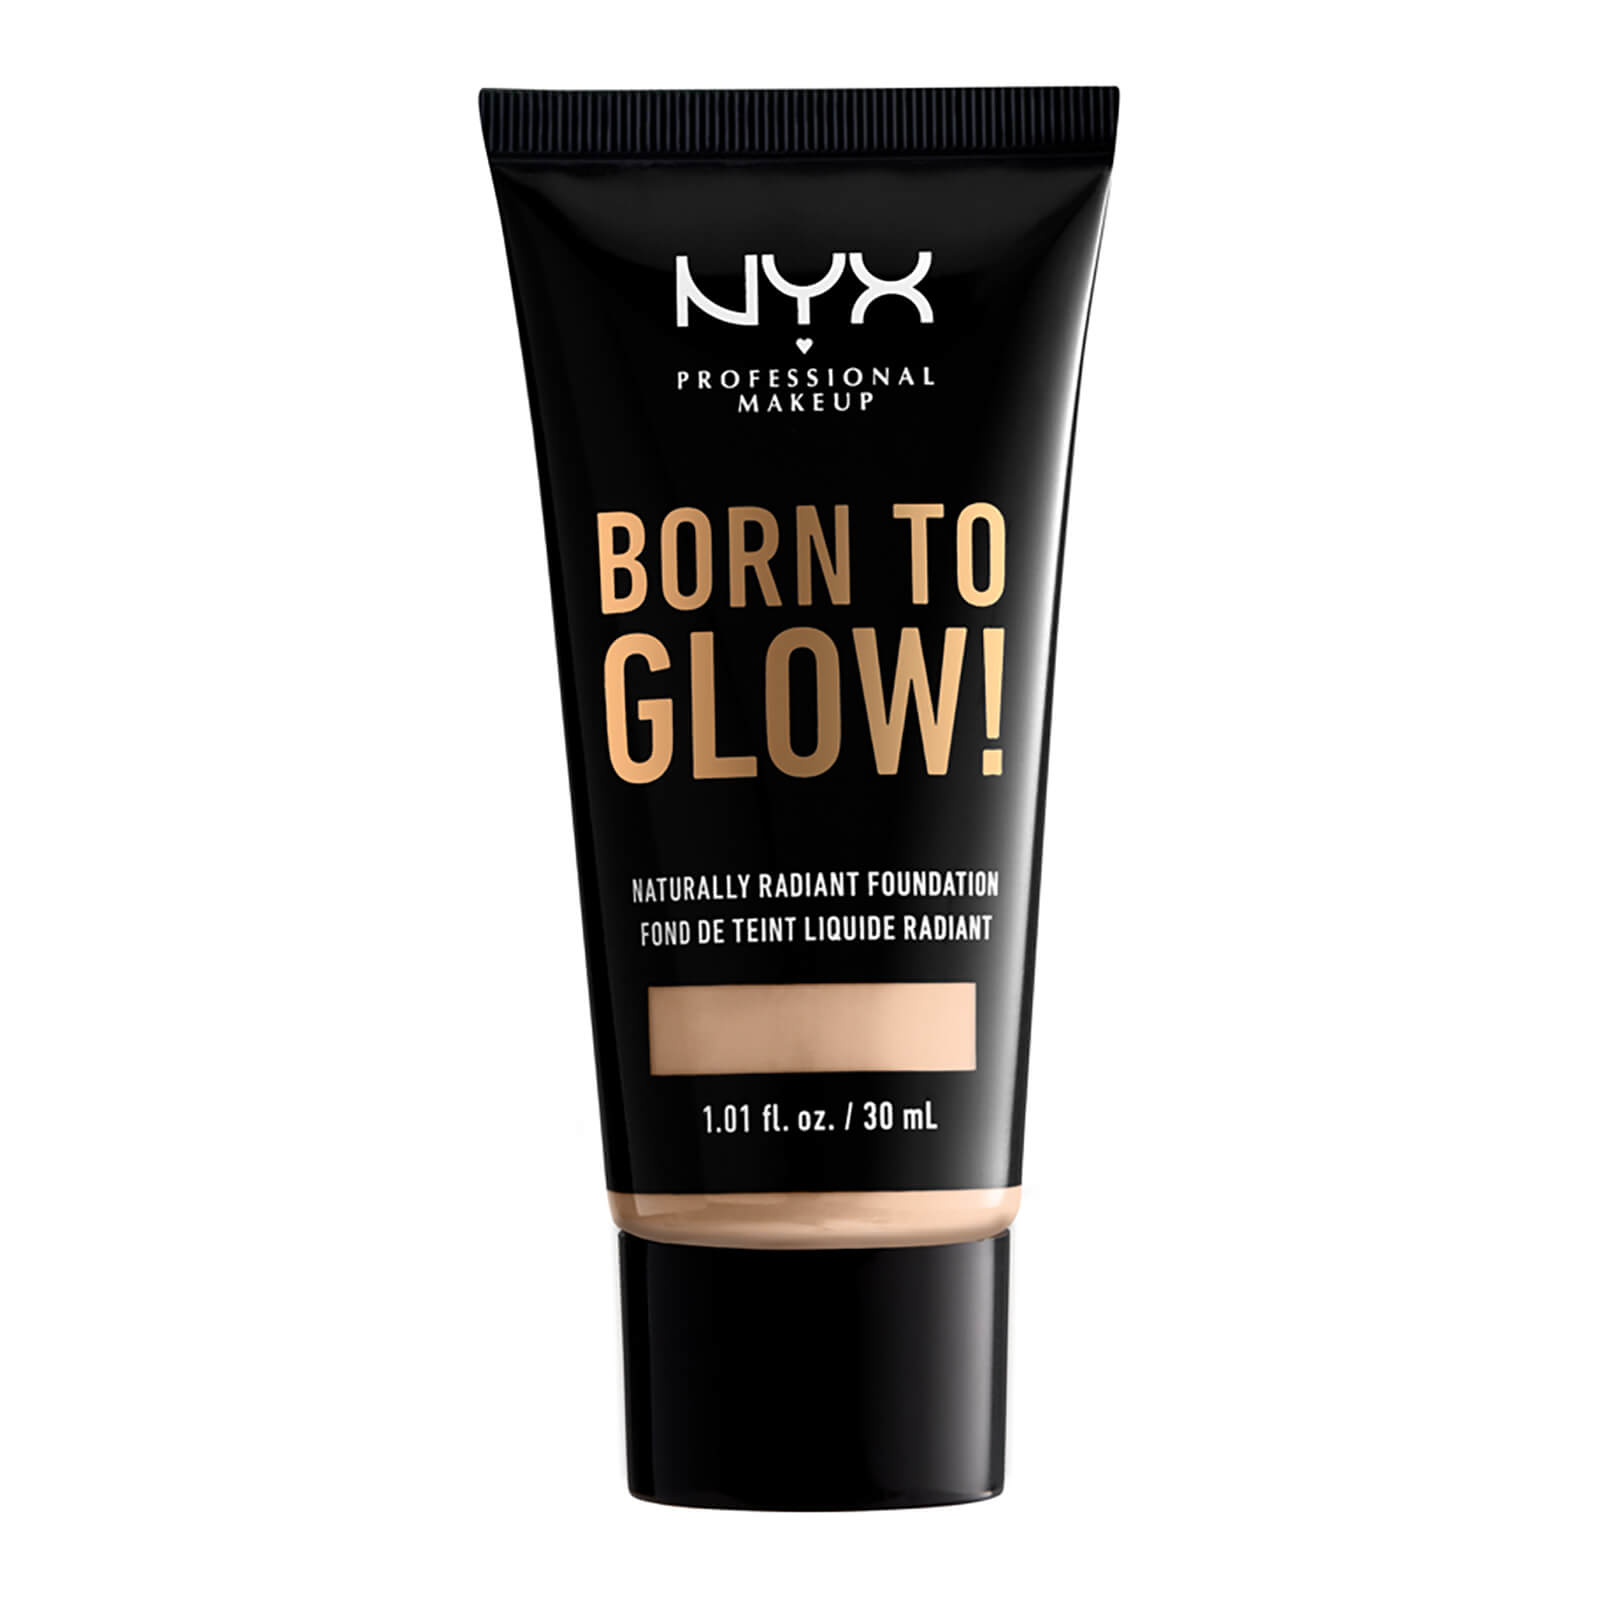 NYX Professional Makeup Born to Glow Naturally Radiant Foundation 30ml (Various Shades) - Light Ivory